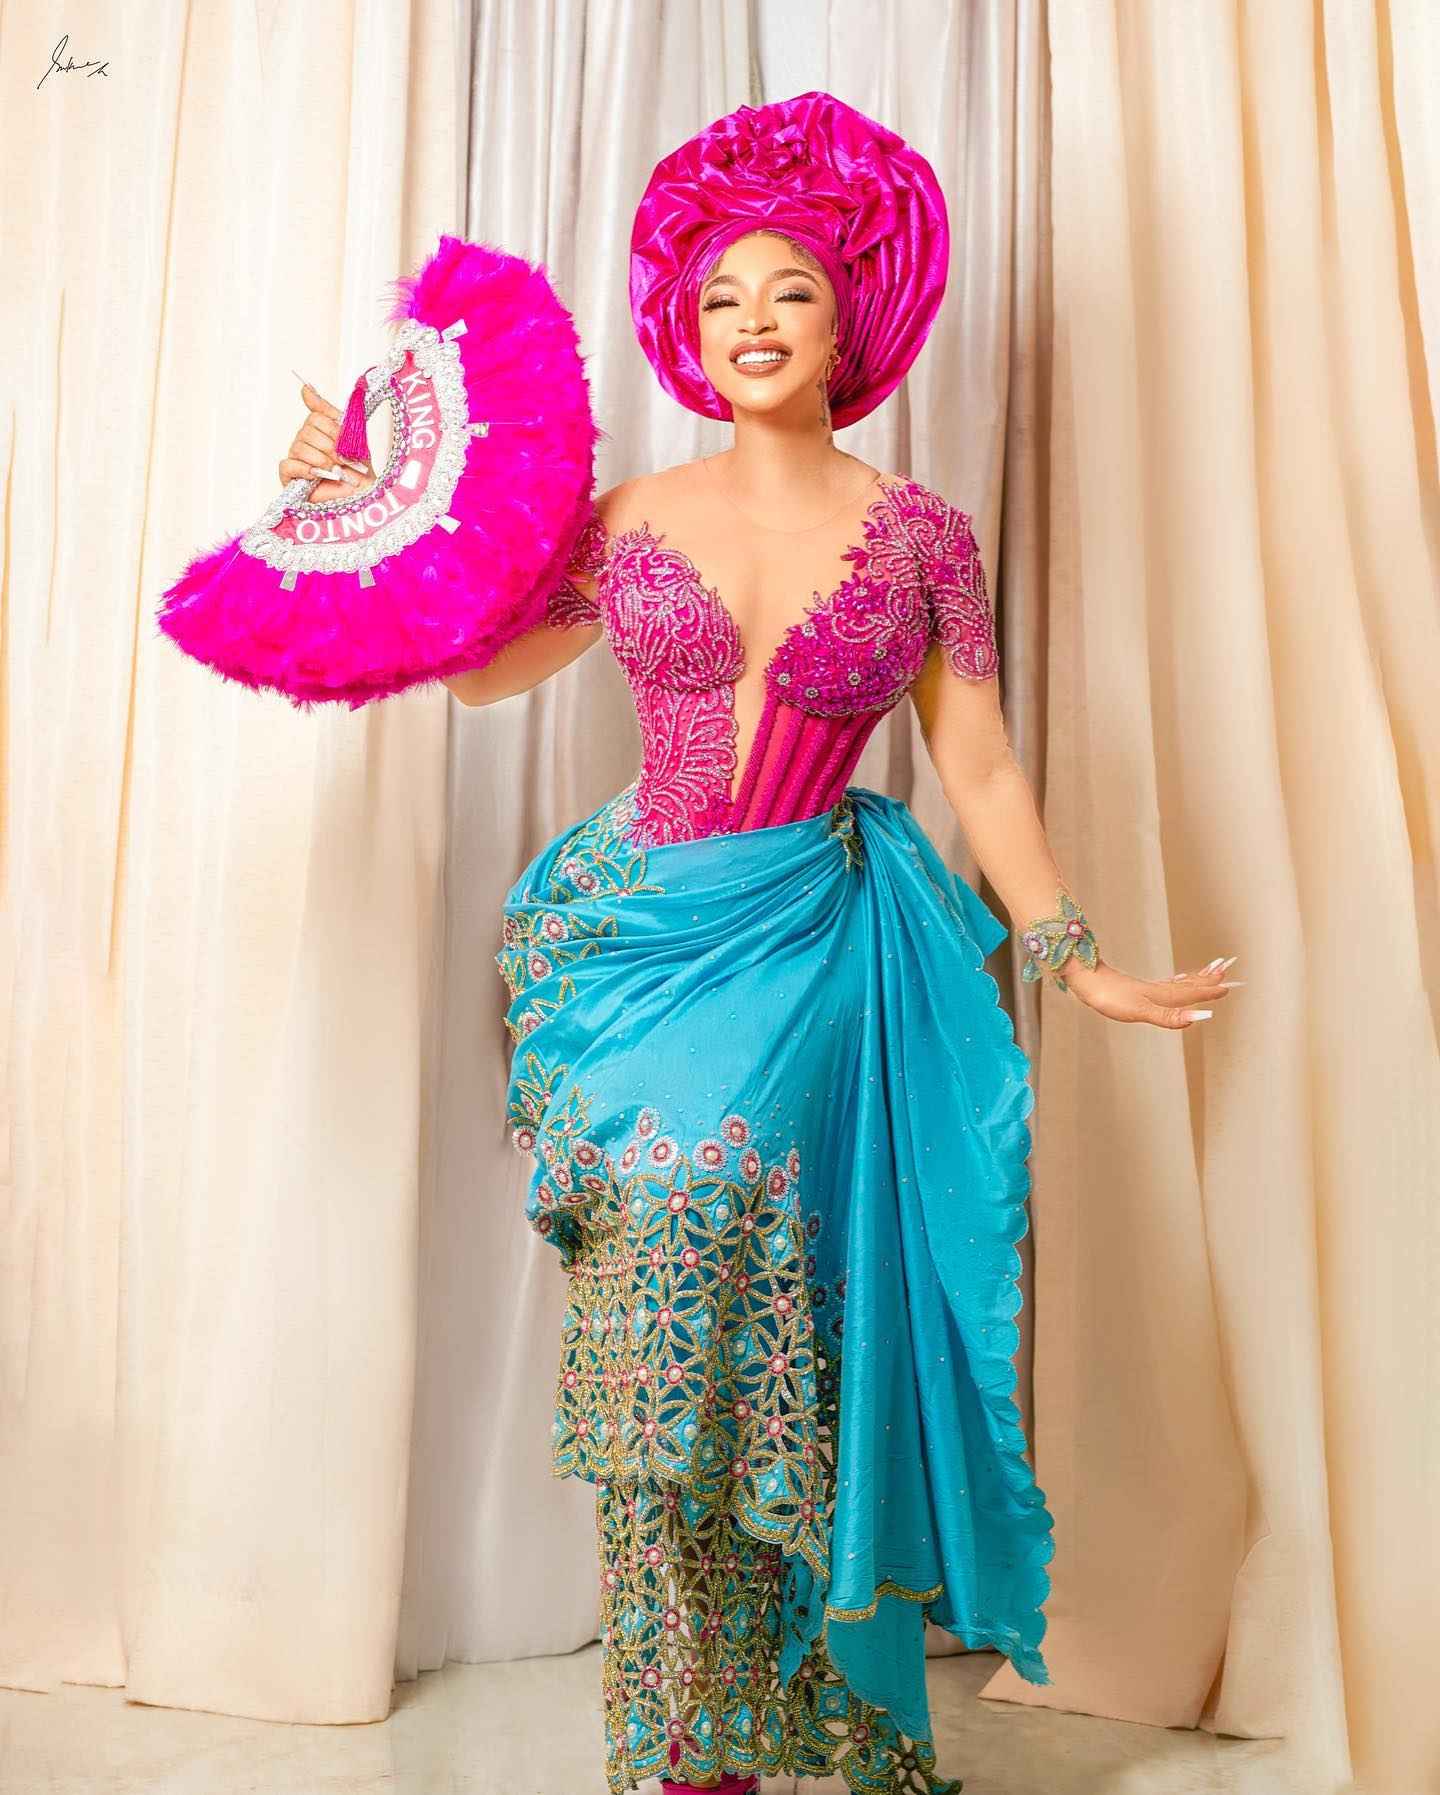 Fans Gush As Nollywood Star Actress, Tonto Dikeh Shows Off Beauty In ...